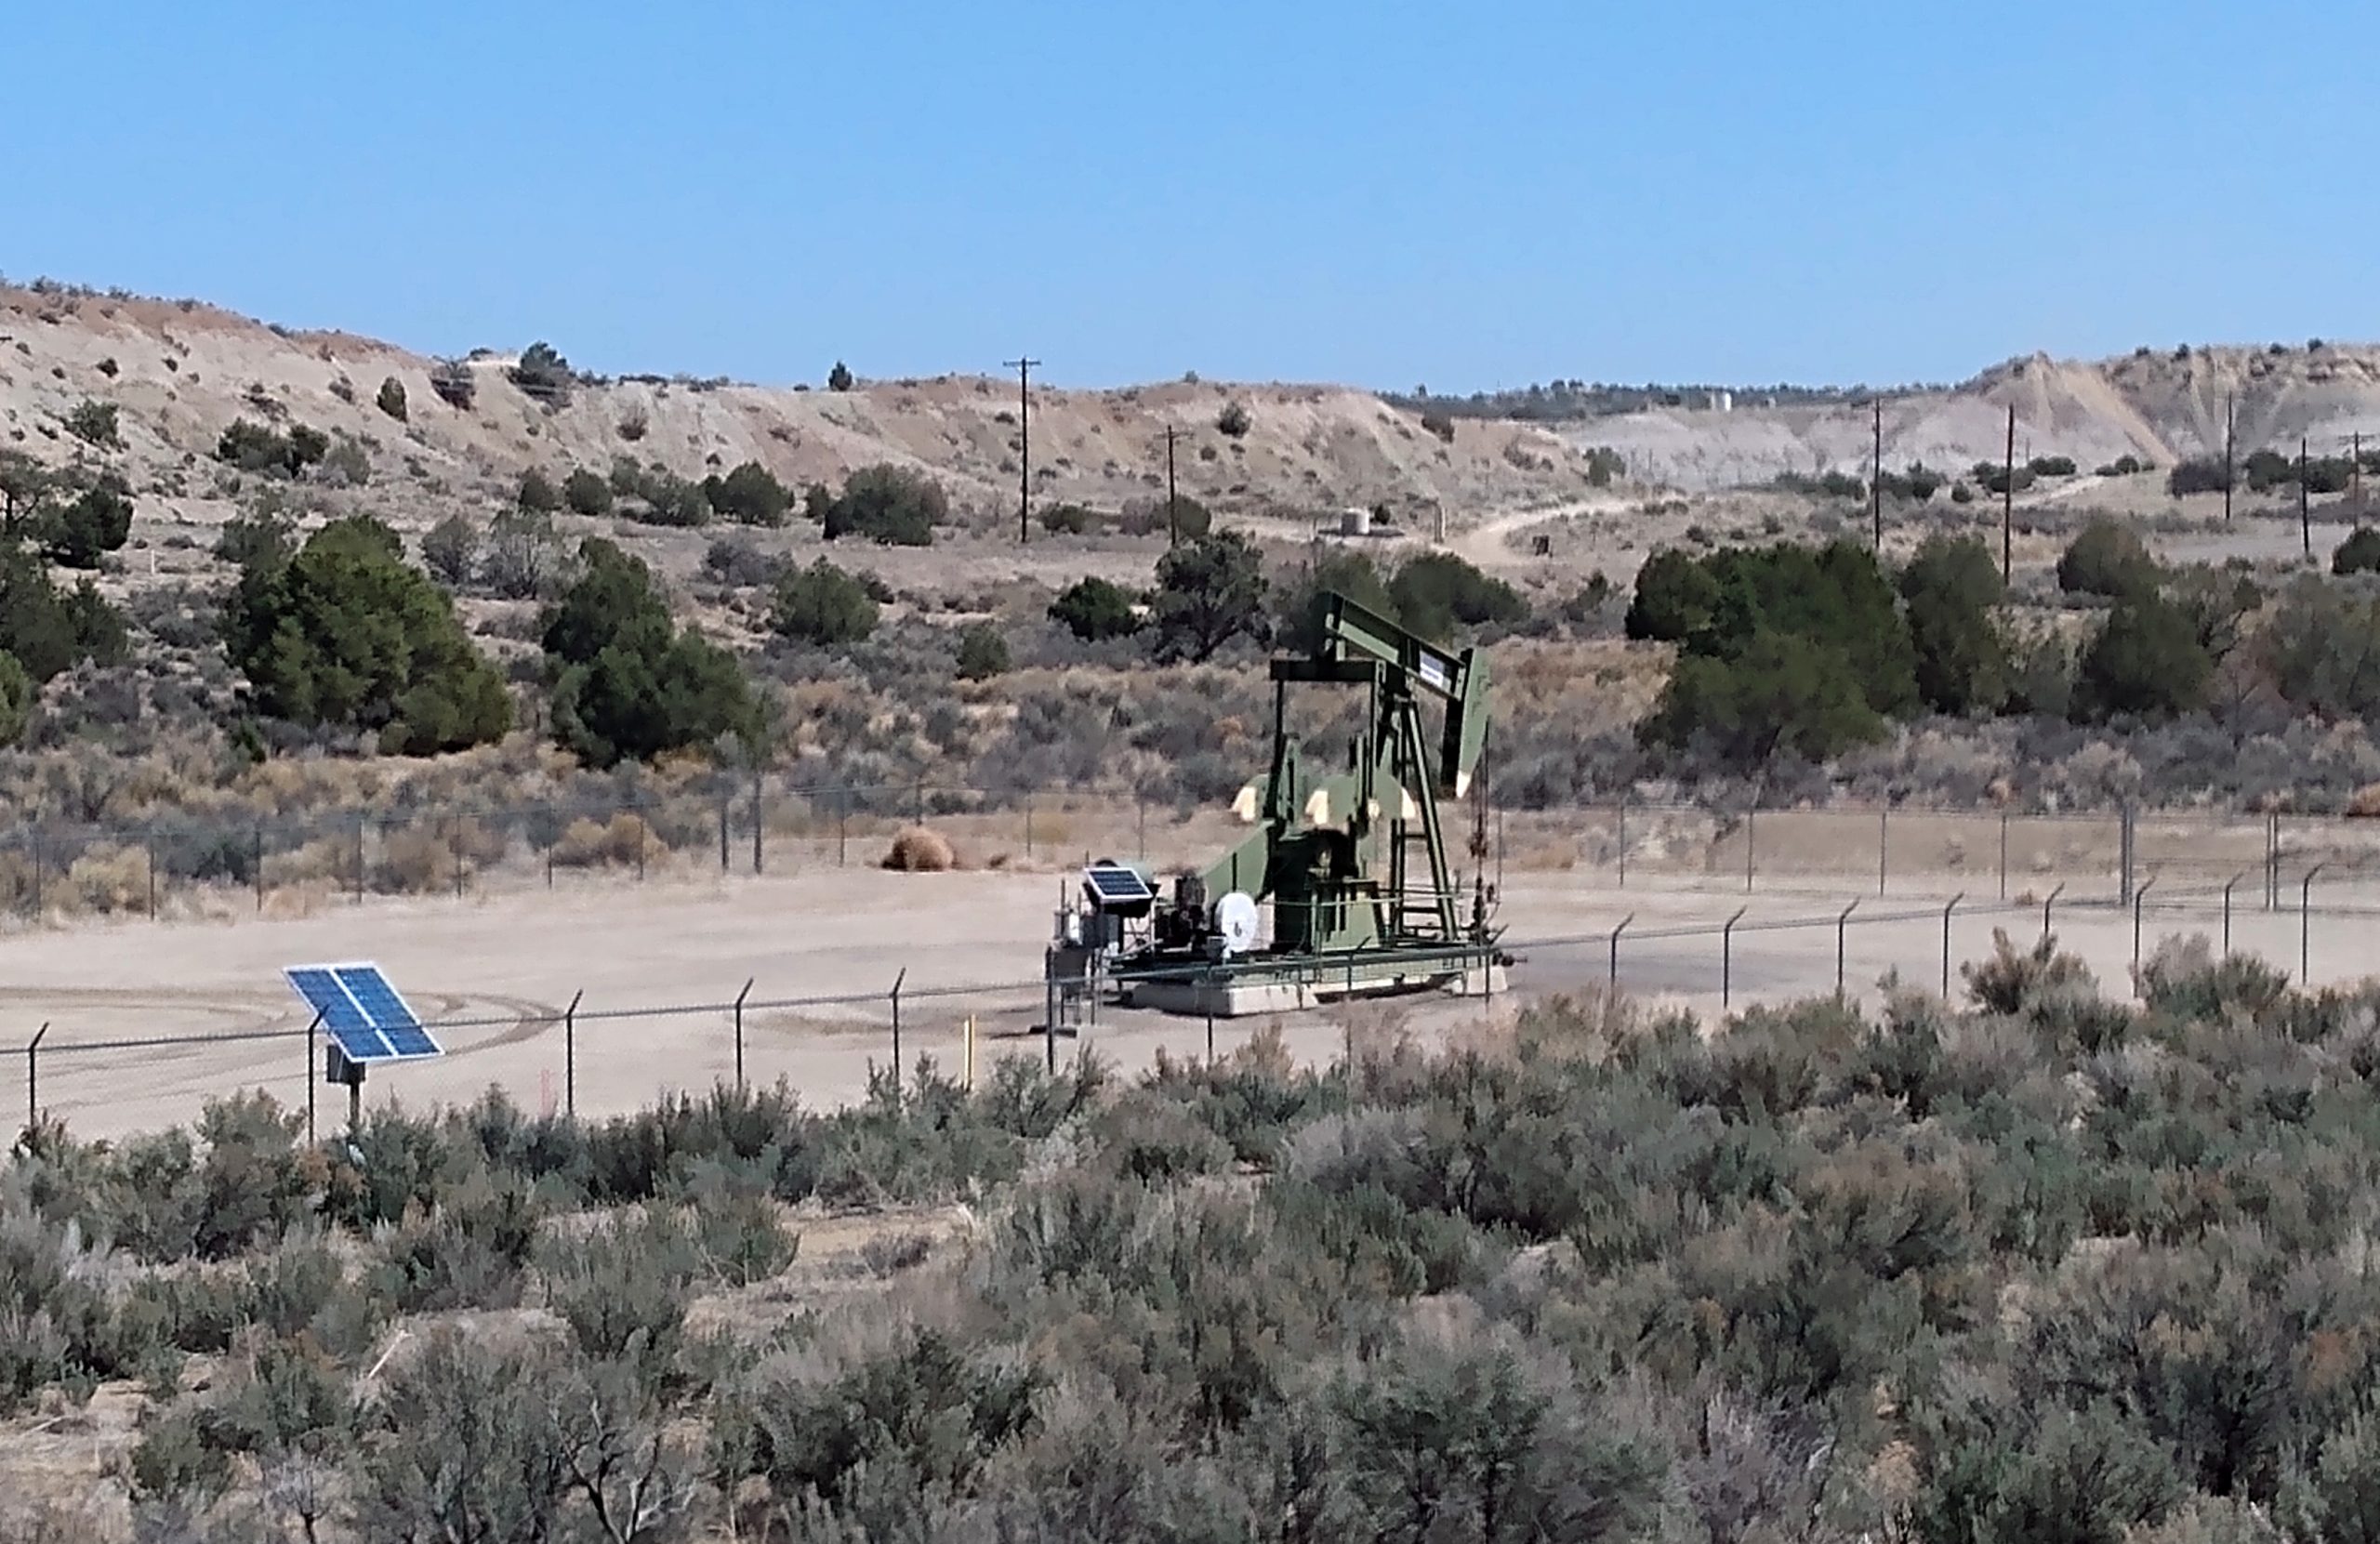 Study finds high share of methane emissions from low-producing oil and gas well sites